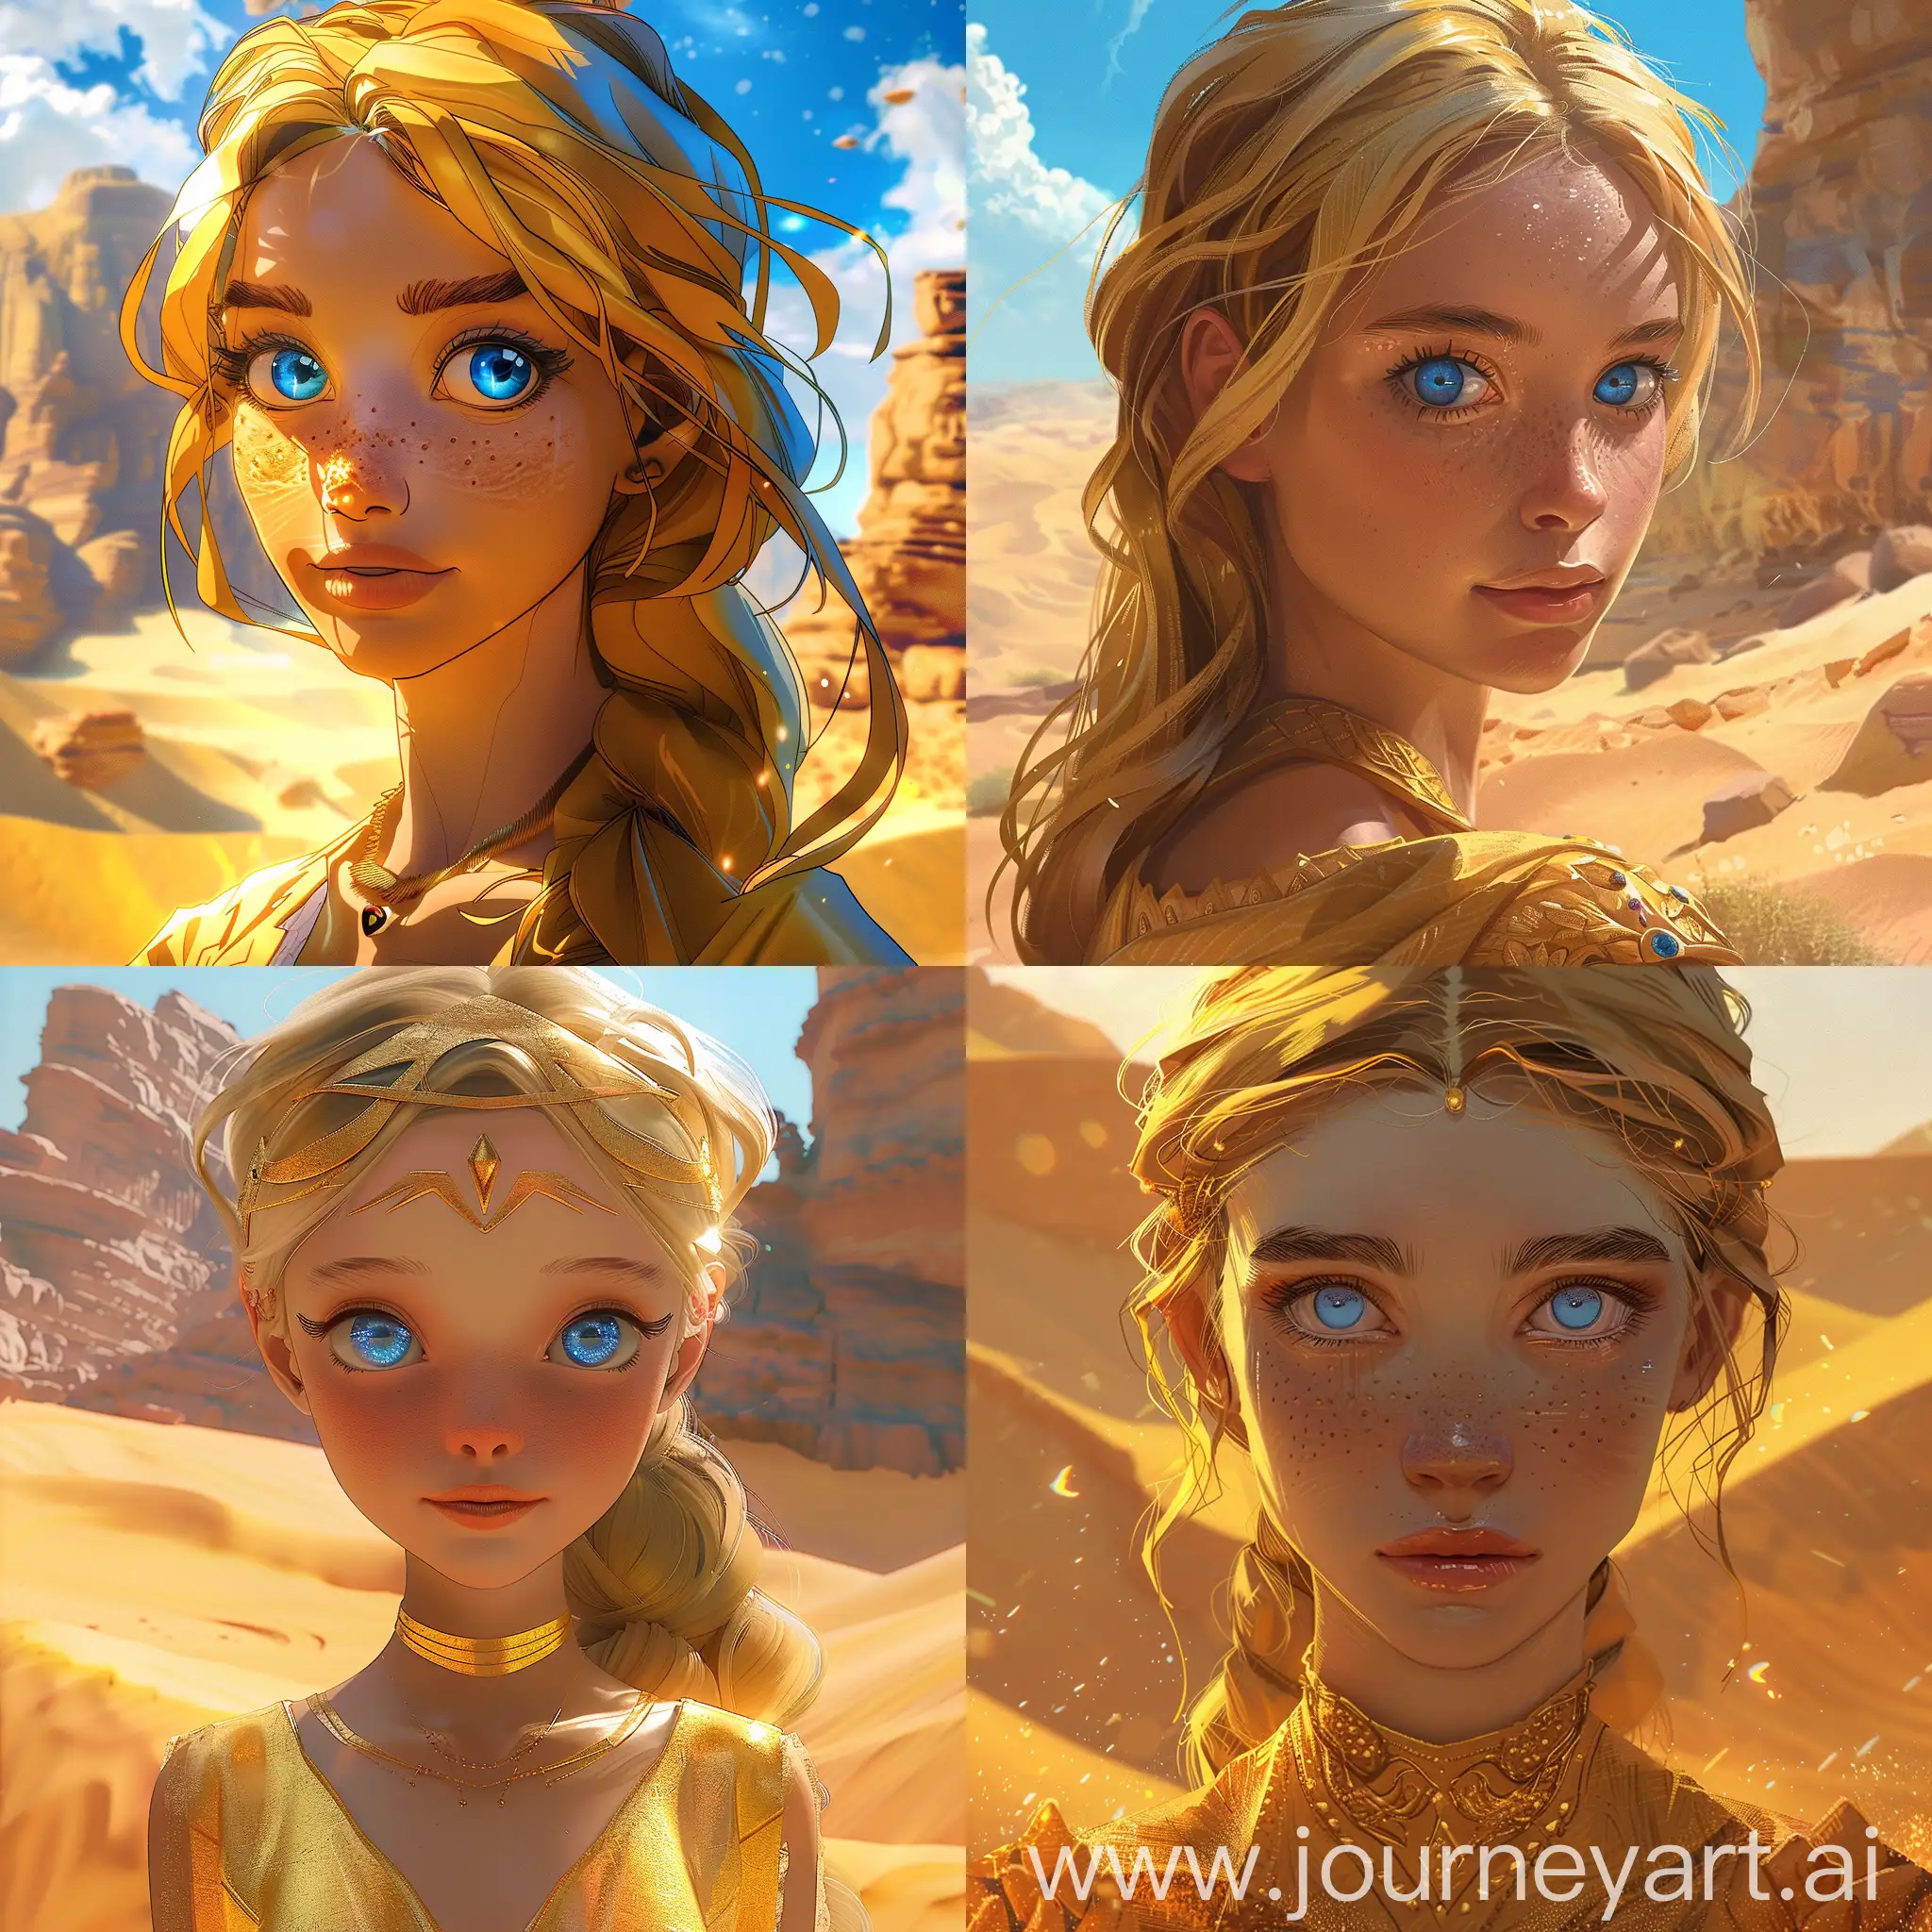 Close-up portrait of a blue-eyes golden princess standing in front of a giant desert, digital style, high quality detaoled